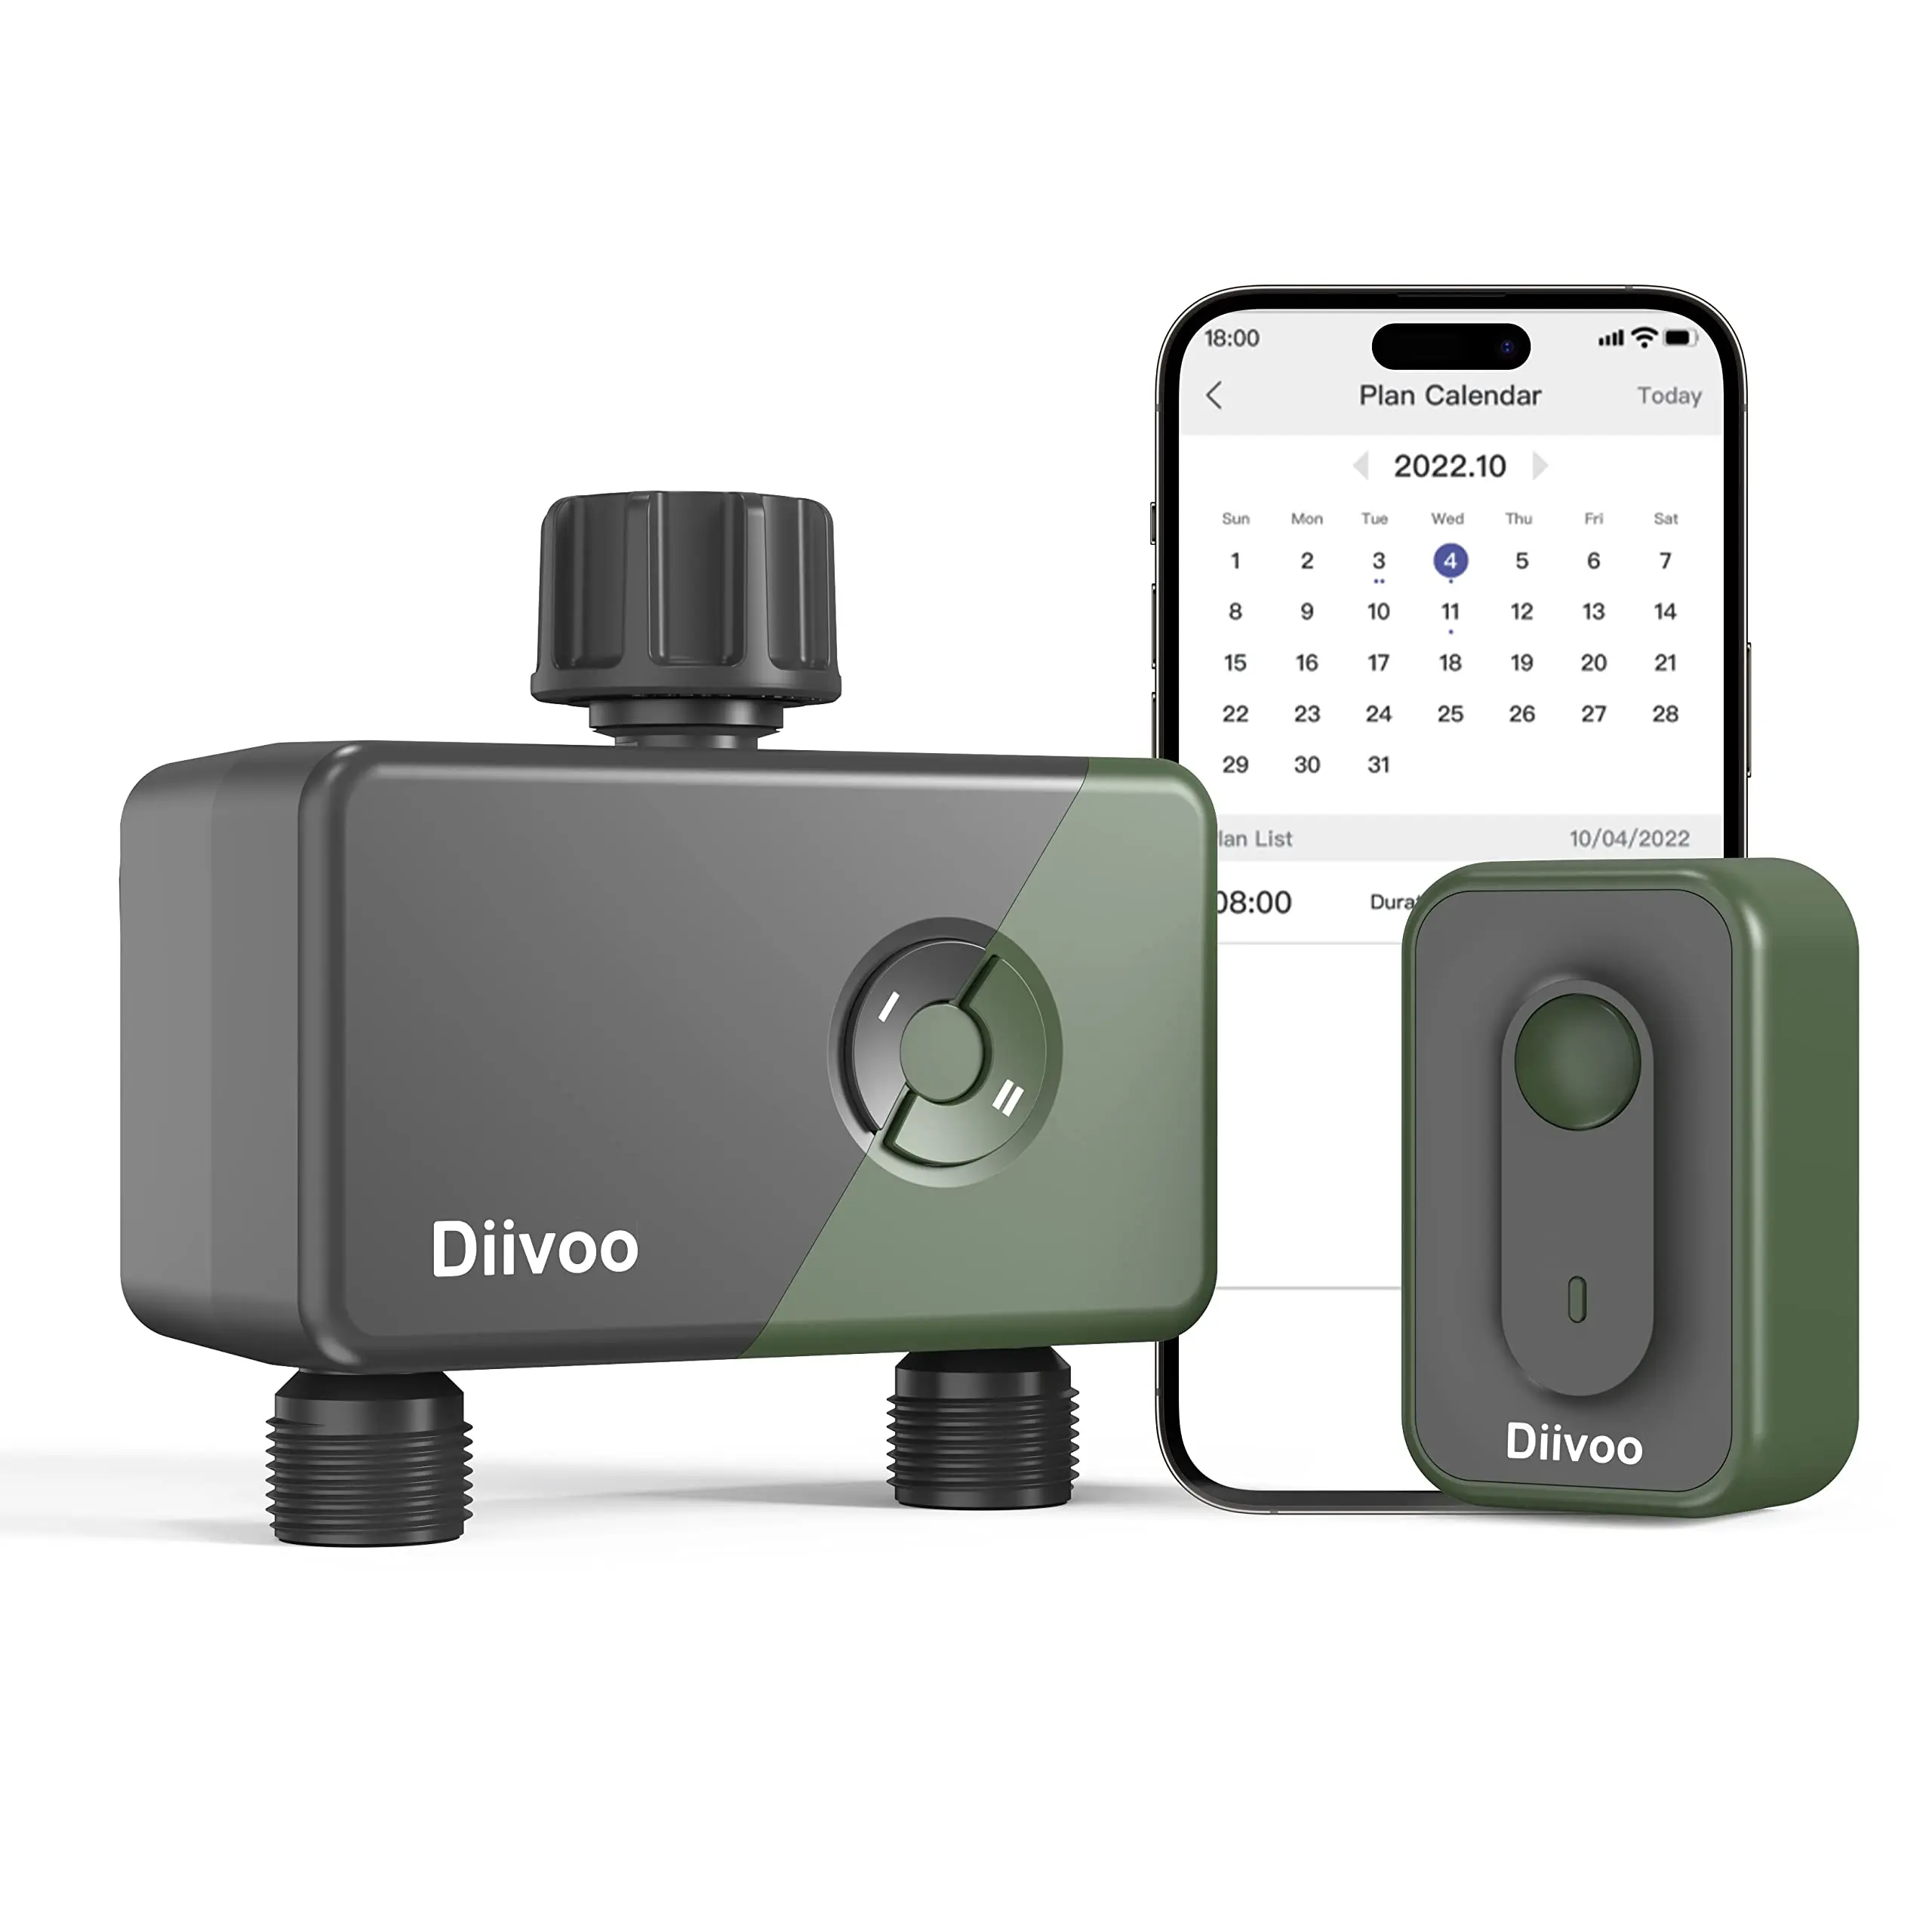 Diivoo Water Hose Timer 1/2 Zone Compatible with Alexa and Google, Remote Control Irrigation Timer, Automatic Manual Watering